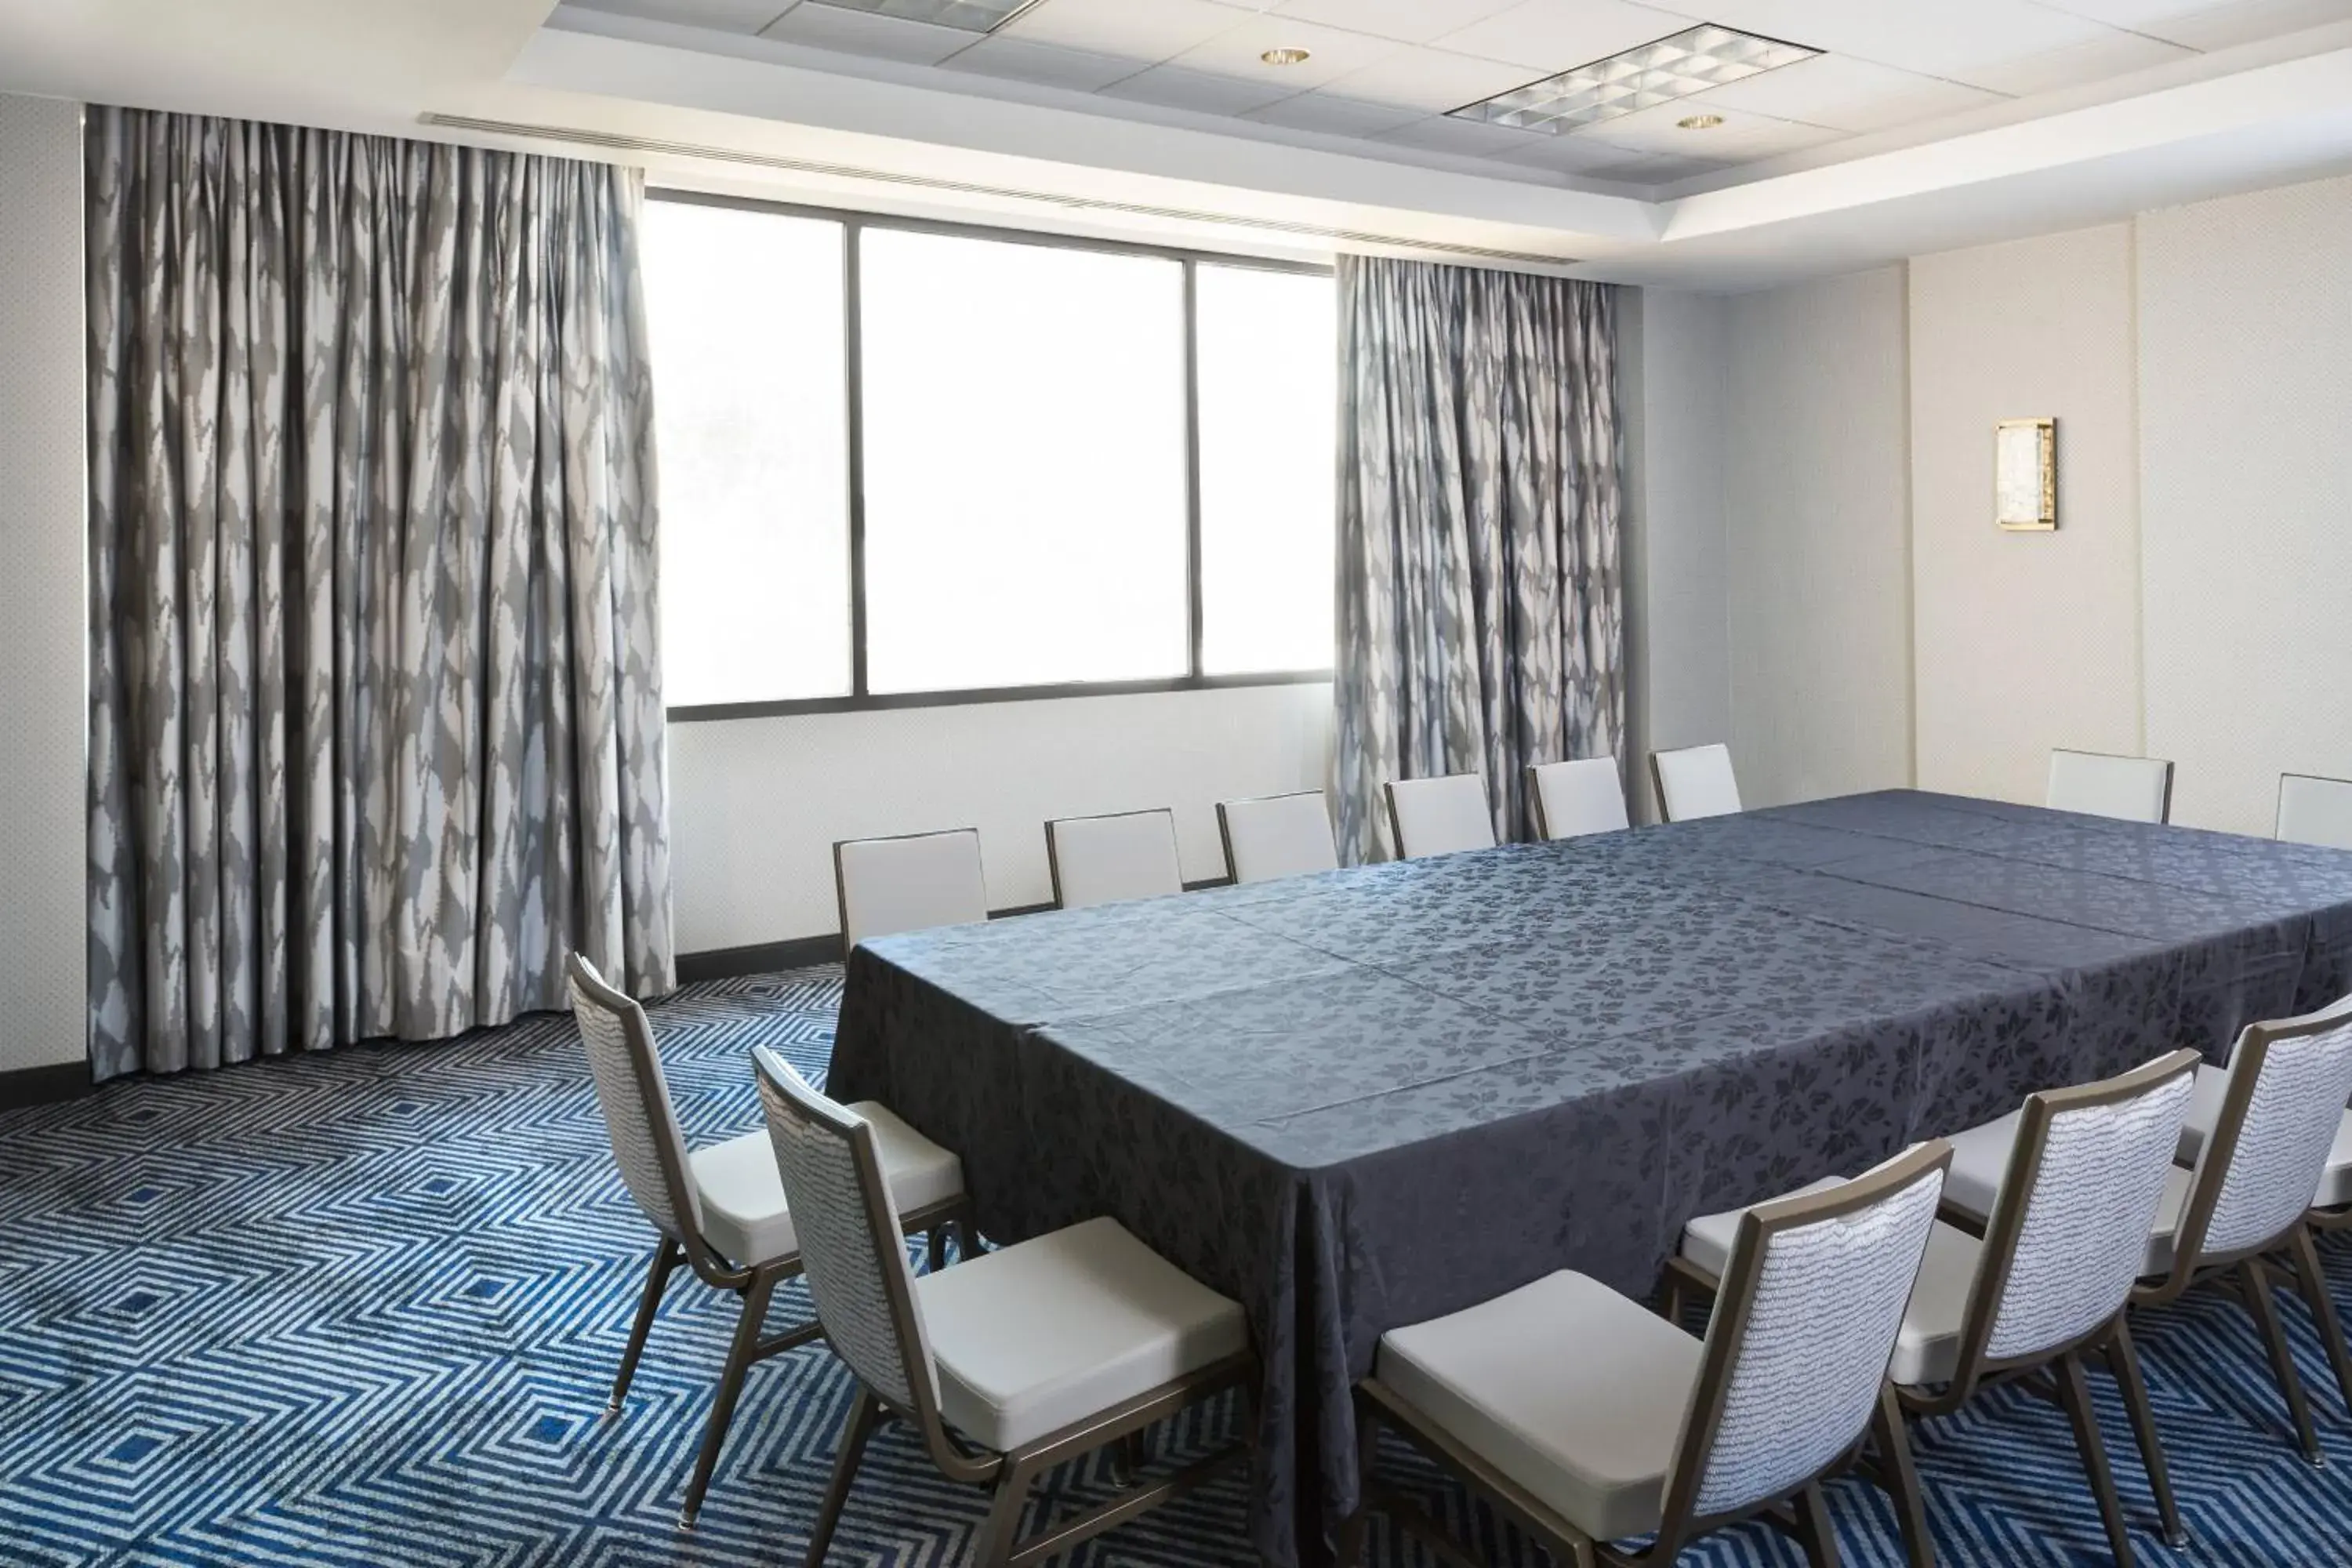 Meeting/conference room in Sheraton Austin Hotel at the Capitol